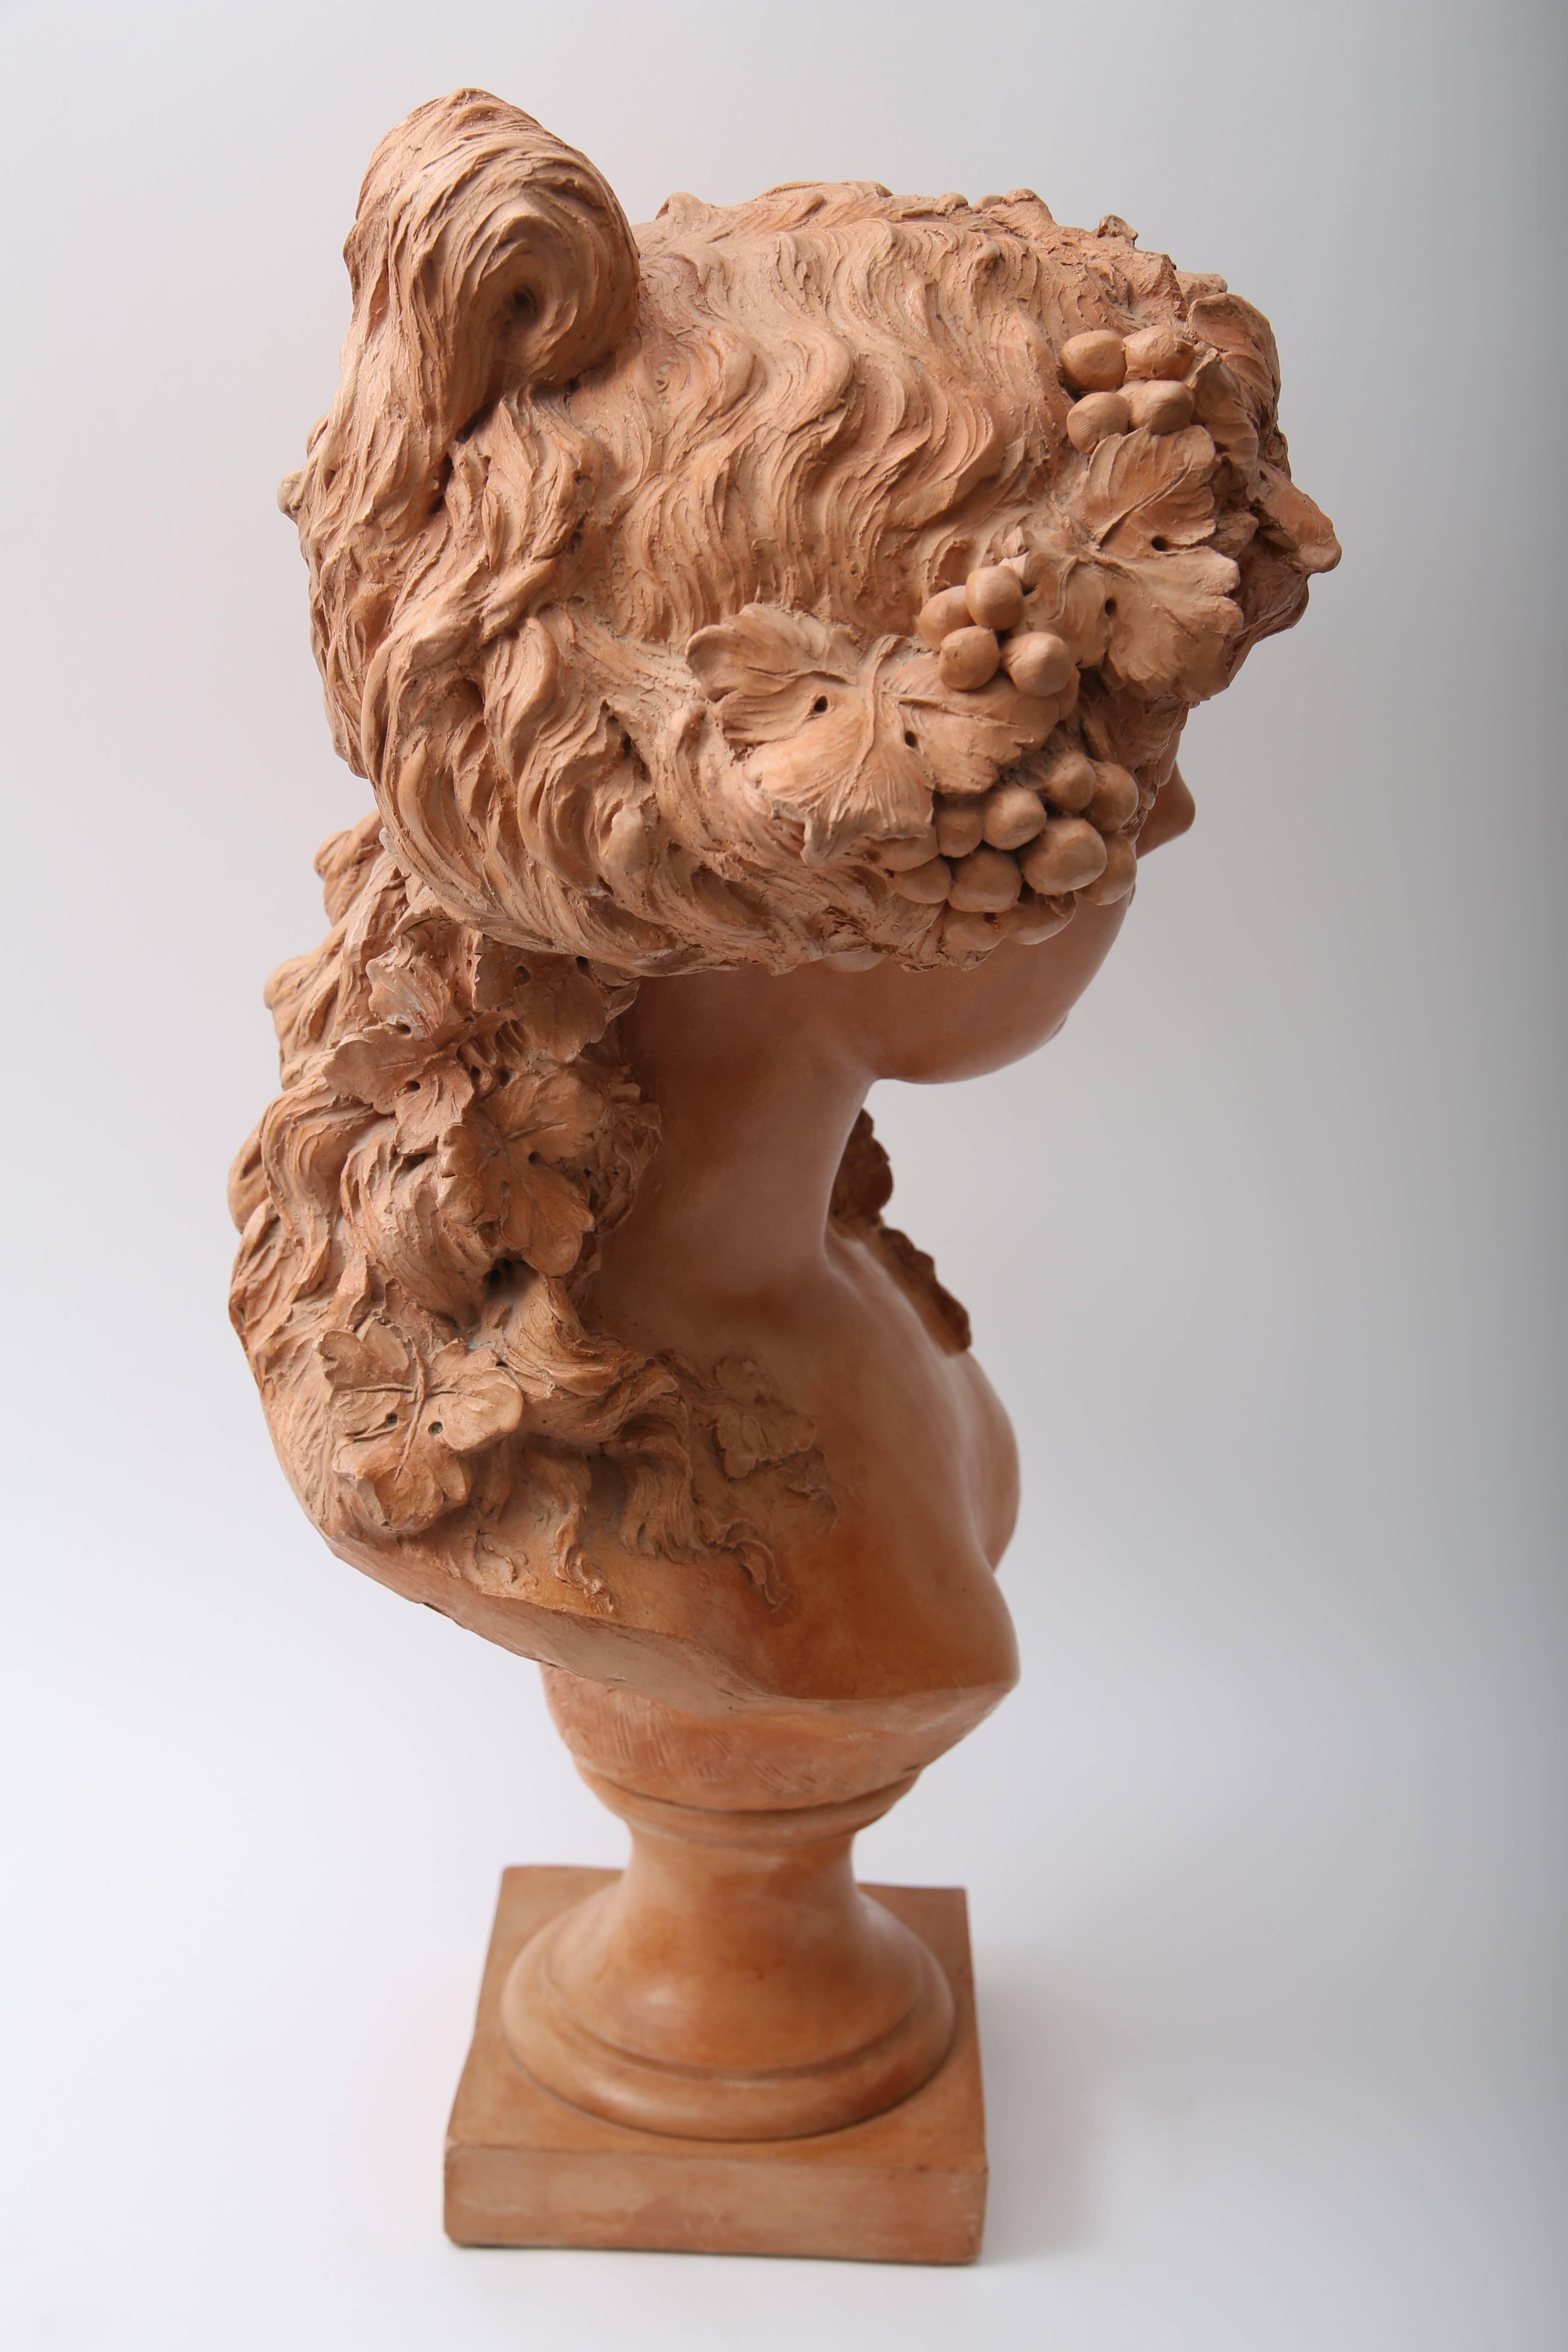 Hand-Crafted Terra Cotta Bust of a Bacchanalian Young Girl